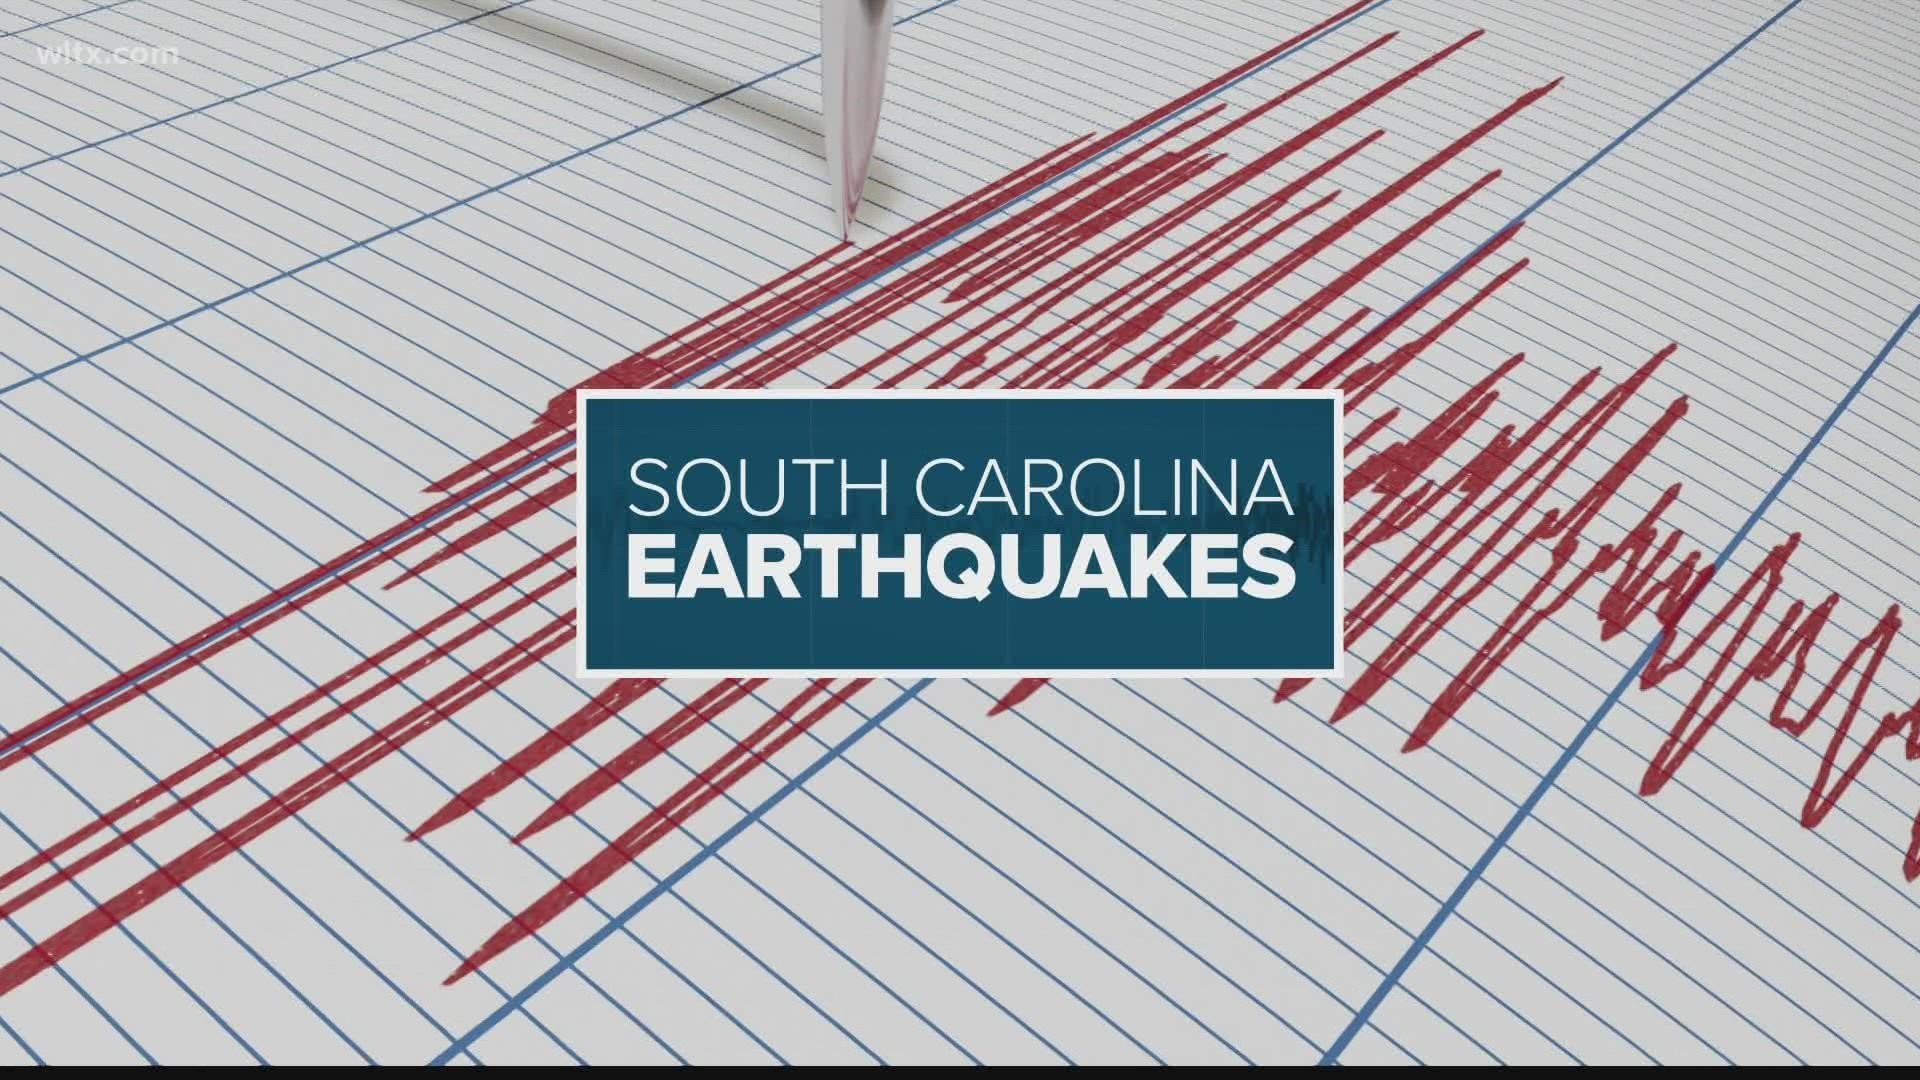 USGS confirms a fifth minor earthquake centered in the Elgin area this week